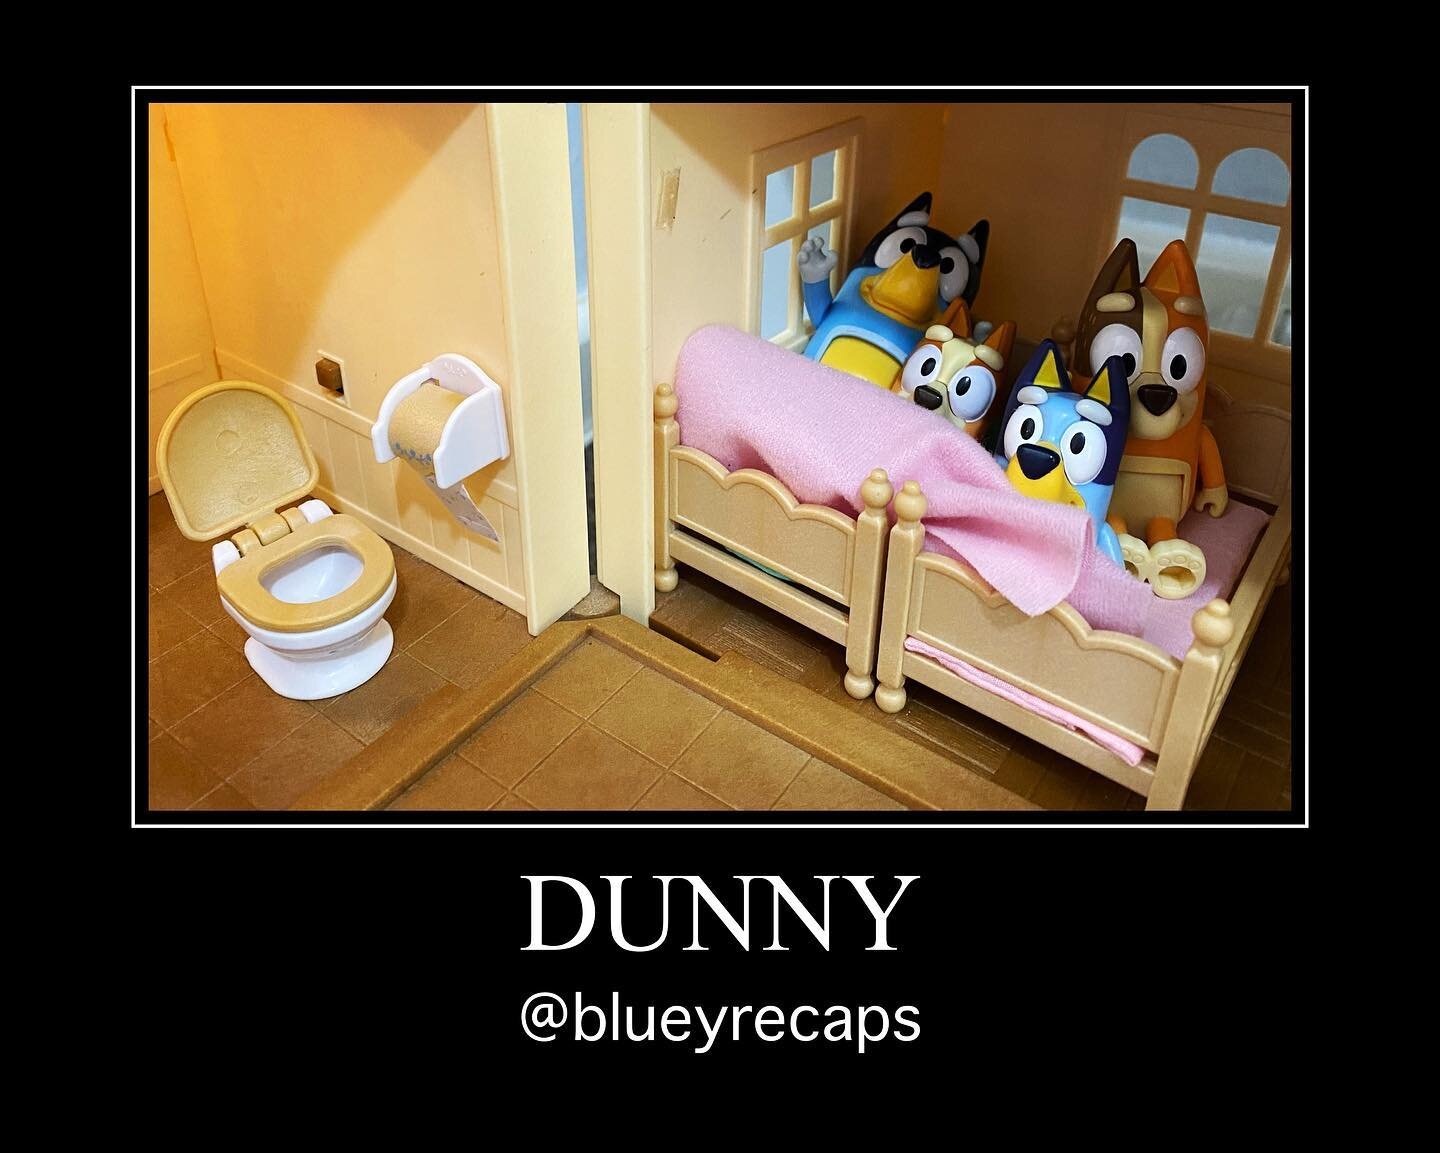 Bluey Recap: Dunny (#2.41)
#bestbits: family snuggles in bed
#lifelesson: you can&rsquo;t win against toddler logic, and all families have different rules 
.
The Heeler&rsquo;s are all lying in bed playing a word guessing game when Bingo proclaims th